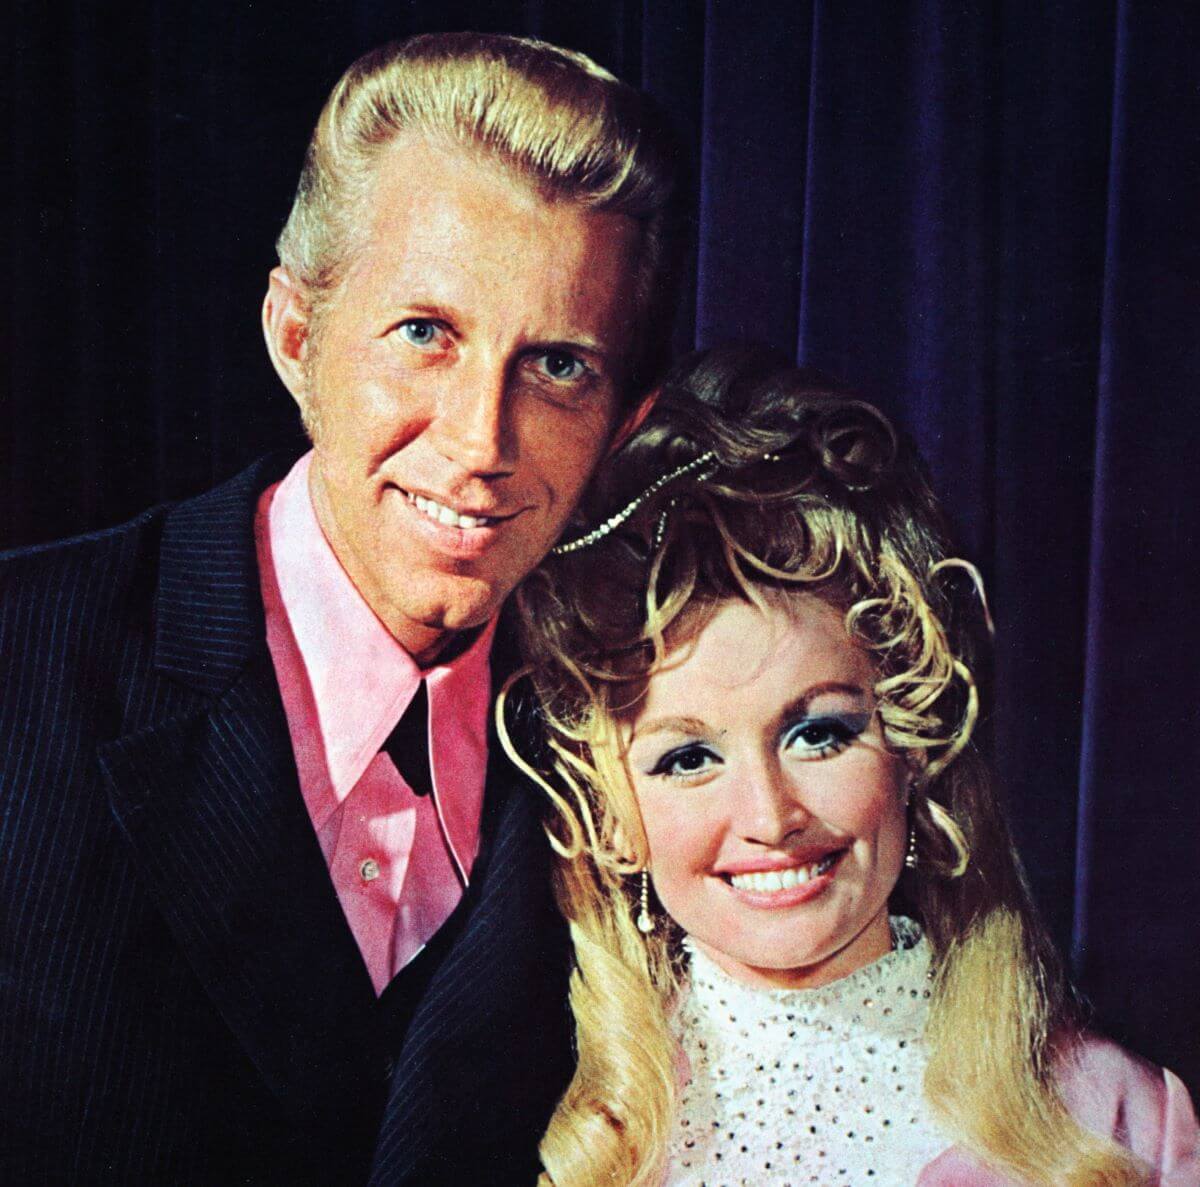 Dolly Parton and Porter Wagoner smile together. They both wear pink shirts.